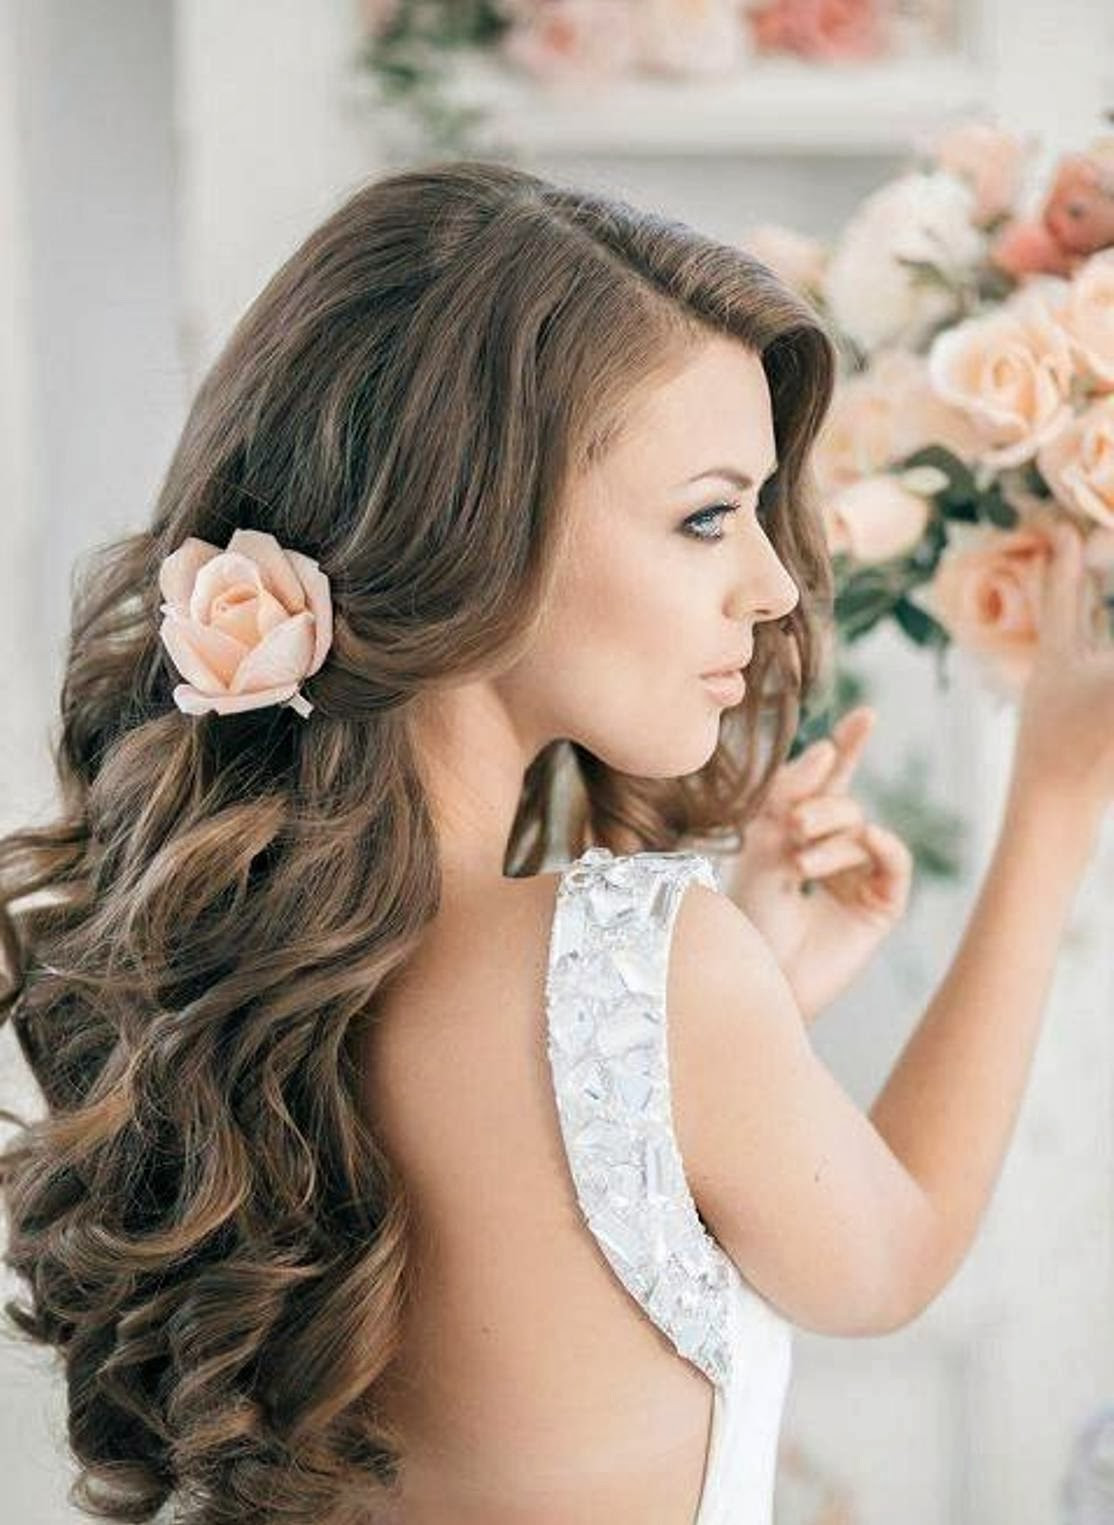 Beautiful Bridesmaid Hairstyles
 Curly hairstyles for long hair women Hair Fashion Style